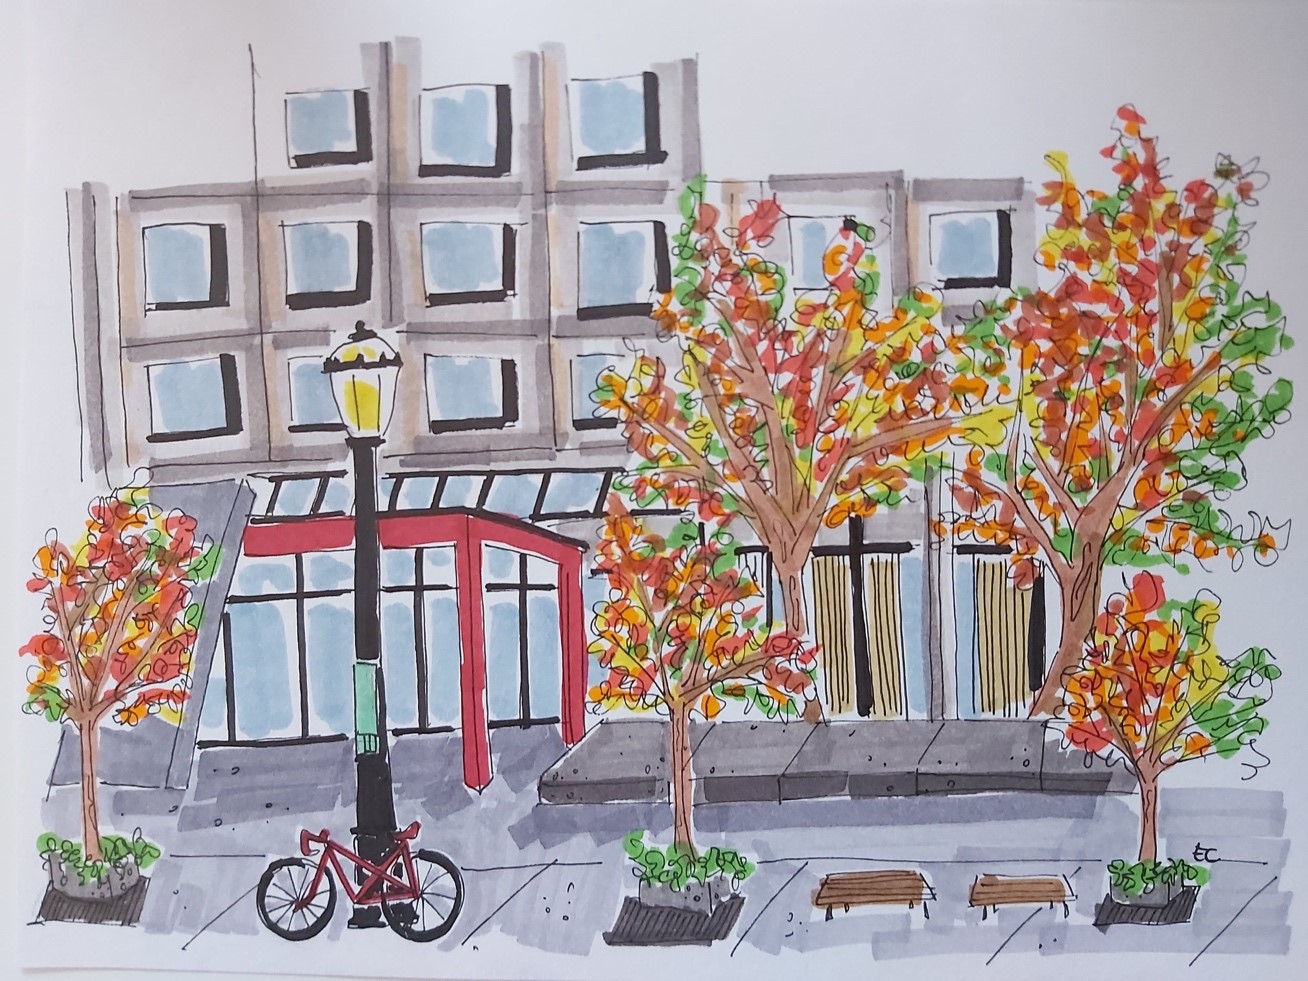 Drawing of Bronfman Building exterior with red bicycle